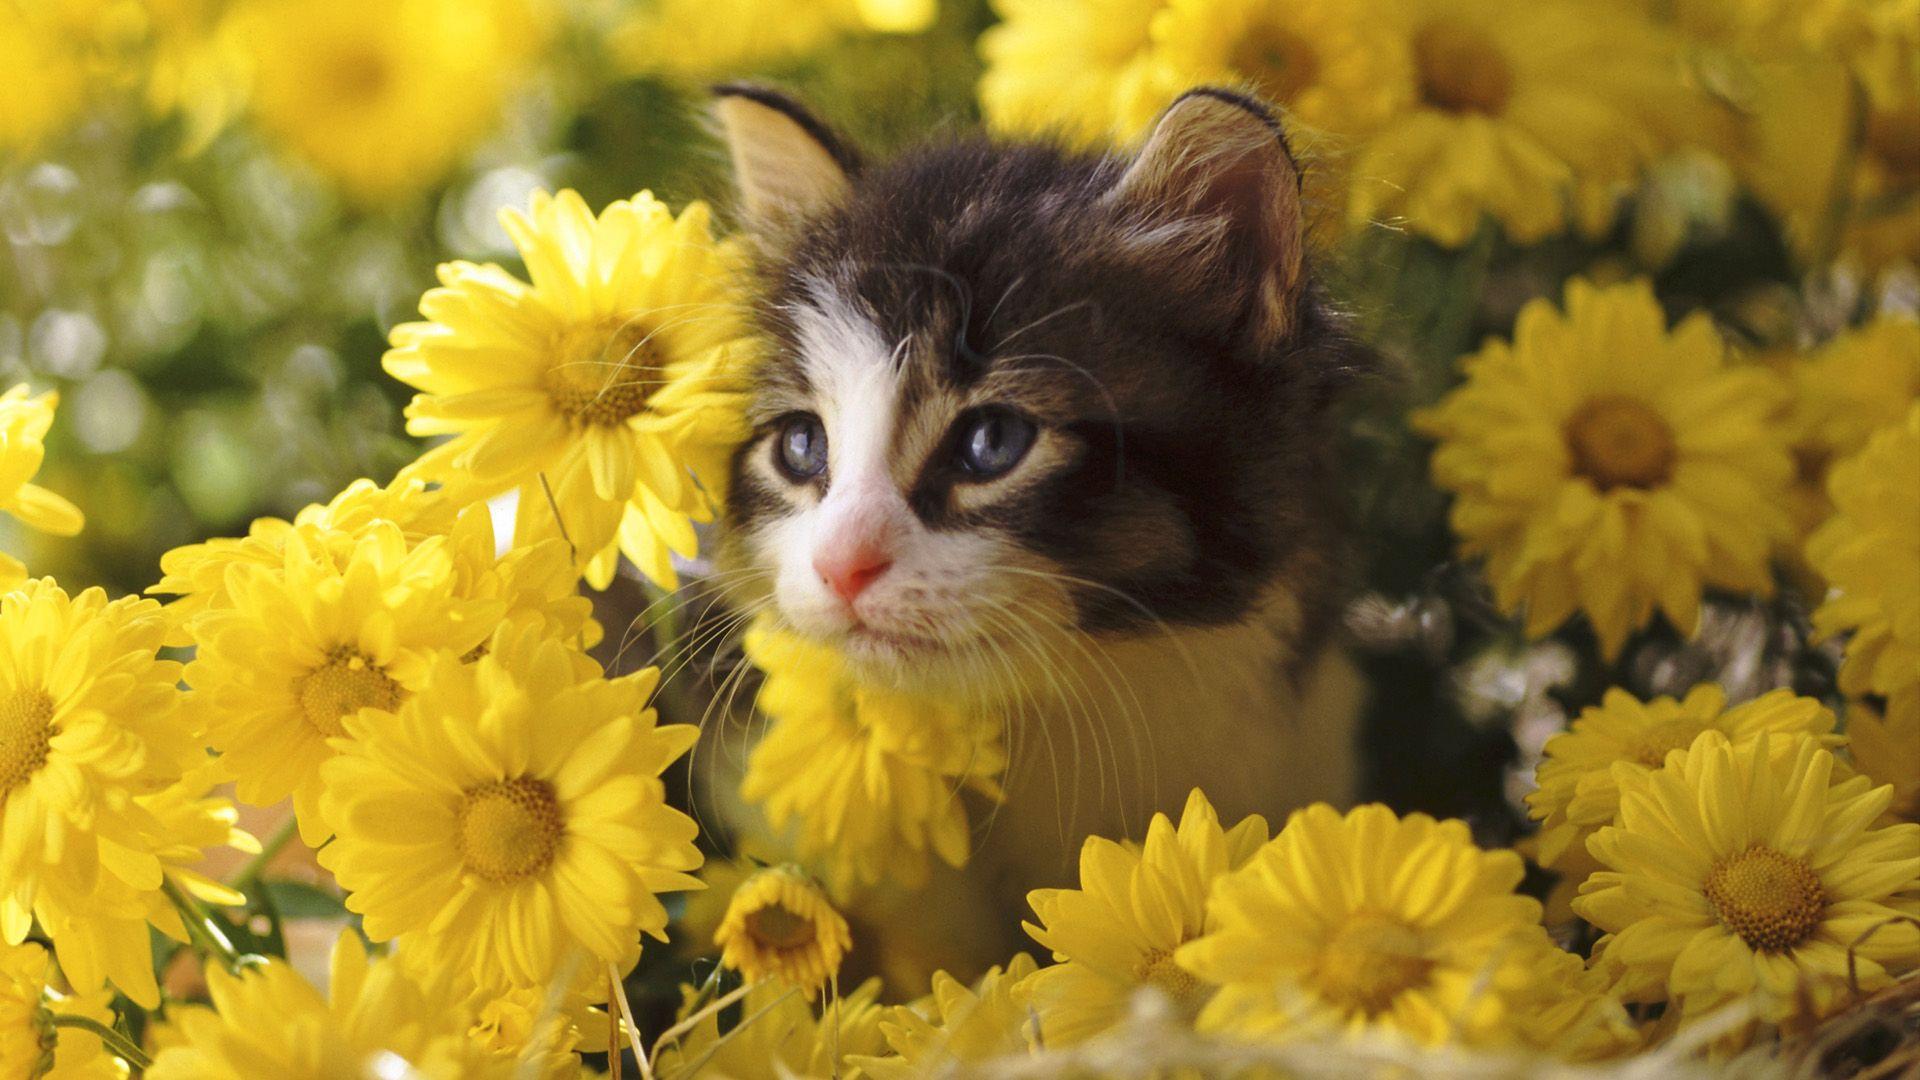 Cat With Flower Background Image and Wallpaper